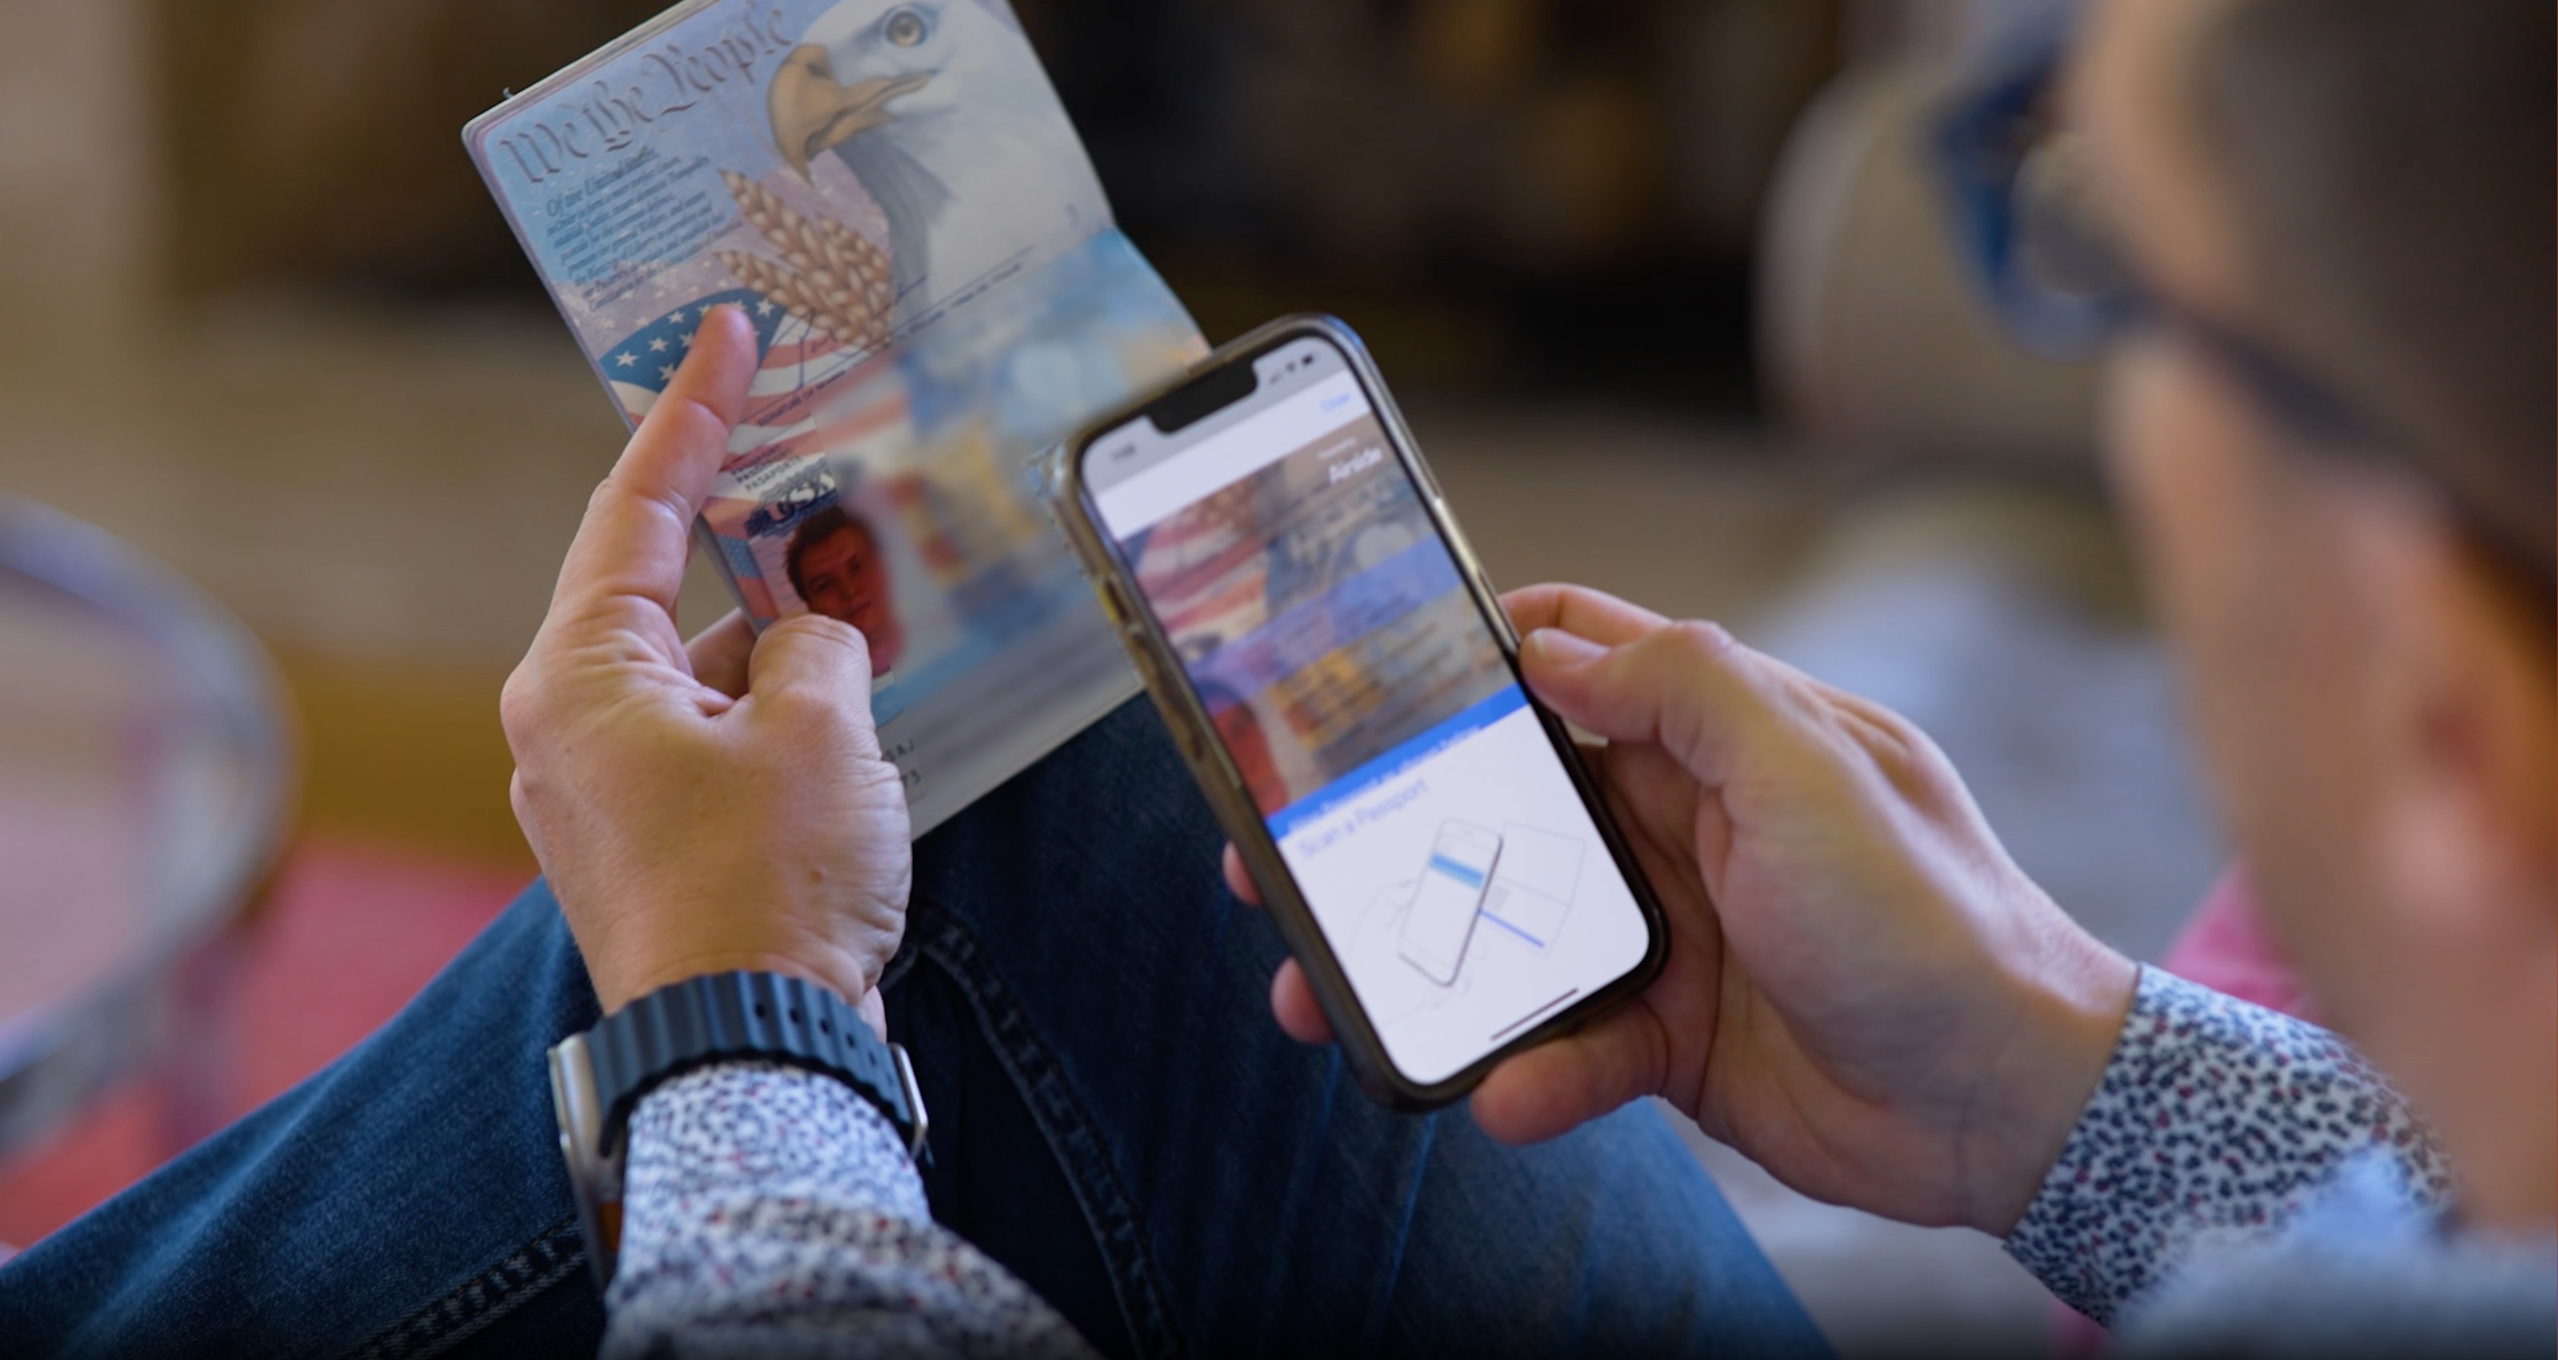 Alaska Airlines Introduces 'Mobile Verify' for Passport Verification from Home